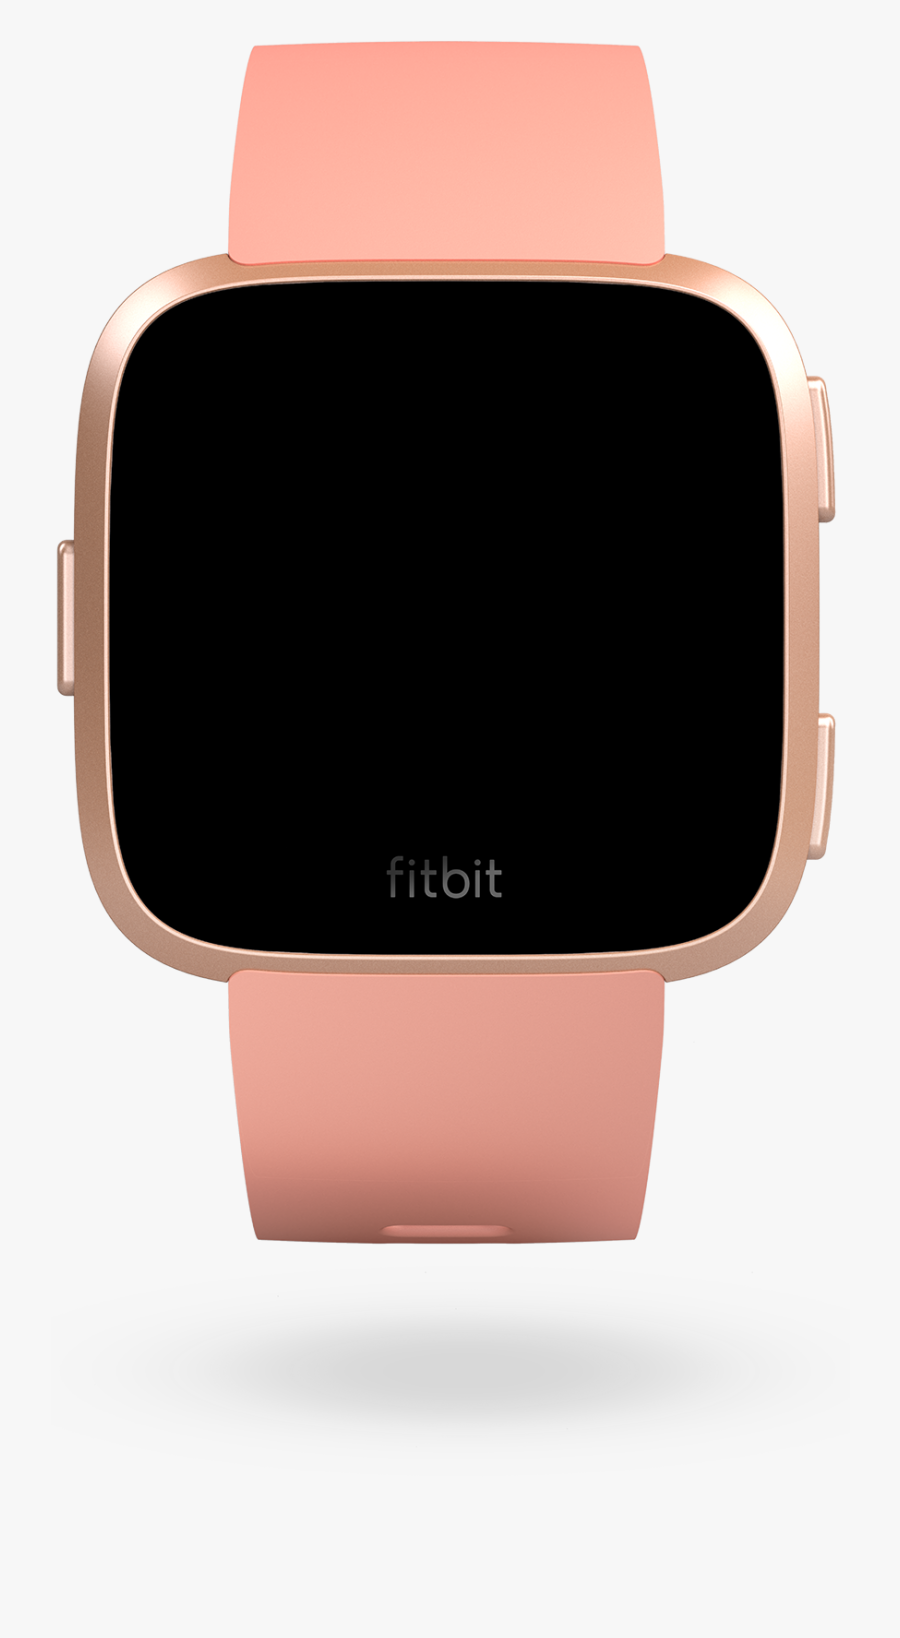 Fitbitos From The Latest - Fitbit Os, Transparent Clipart